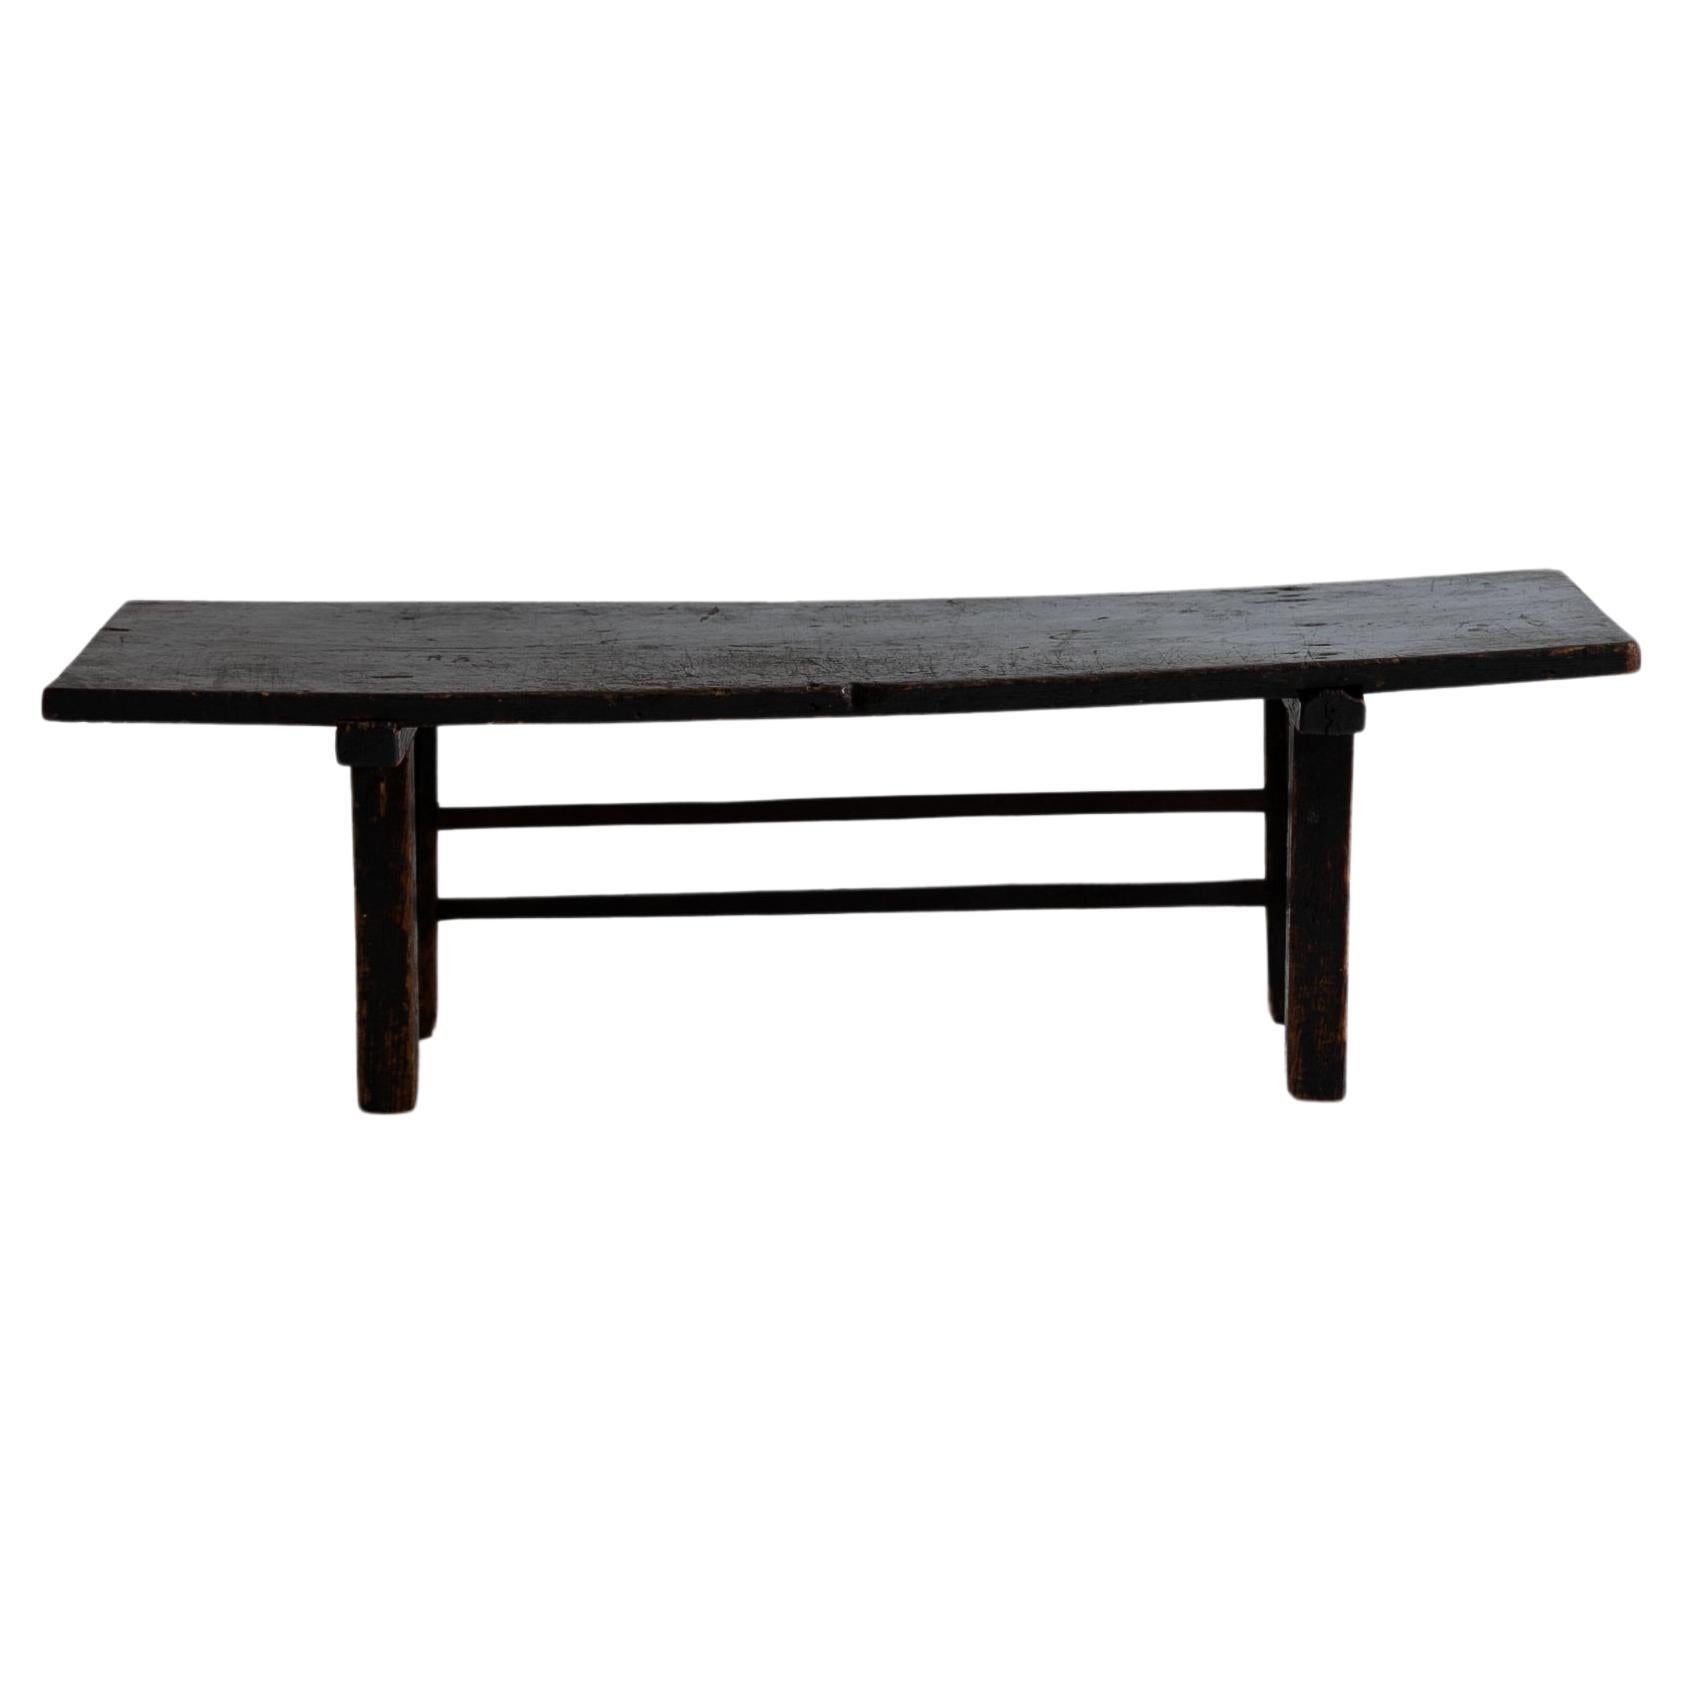 Japanese old wooden low table/ wabisabi coffee table/1850-1920